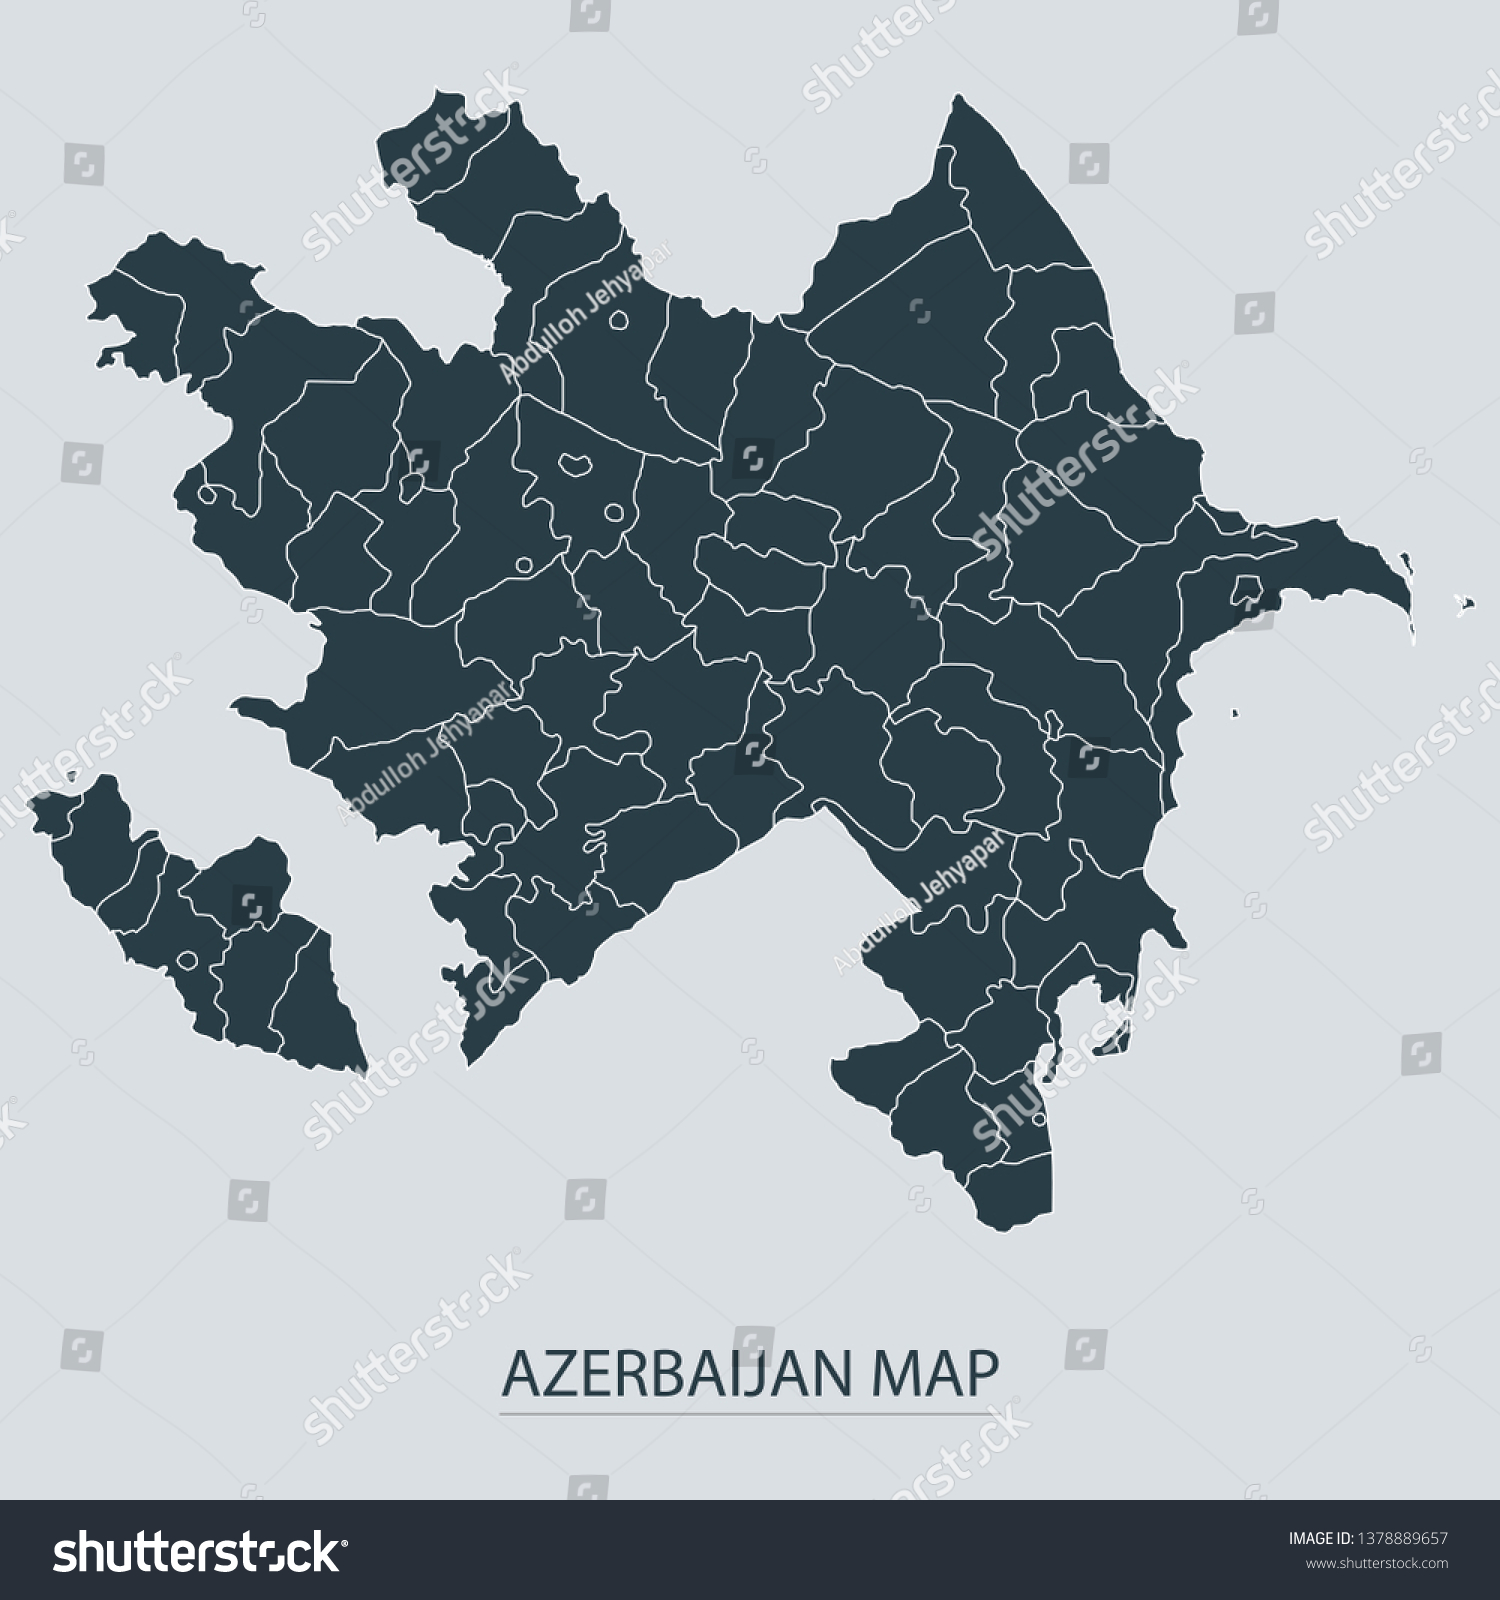 SVG of Azerbaijan map on gray background vector, Azerbaijan Map Outline Shape Gray on White Vector Illustration, Map with name. High detailed Gray illustration map Azerbaijan. svg